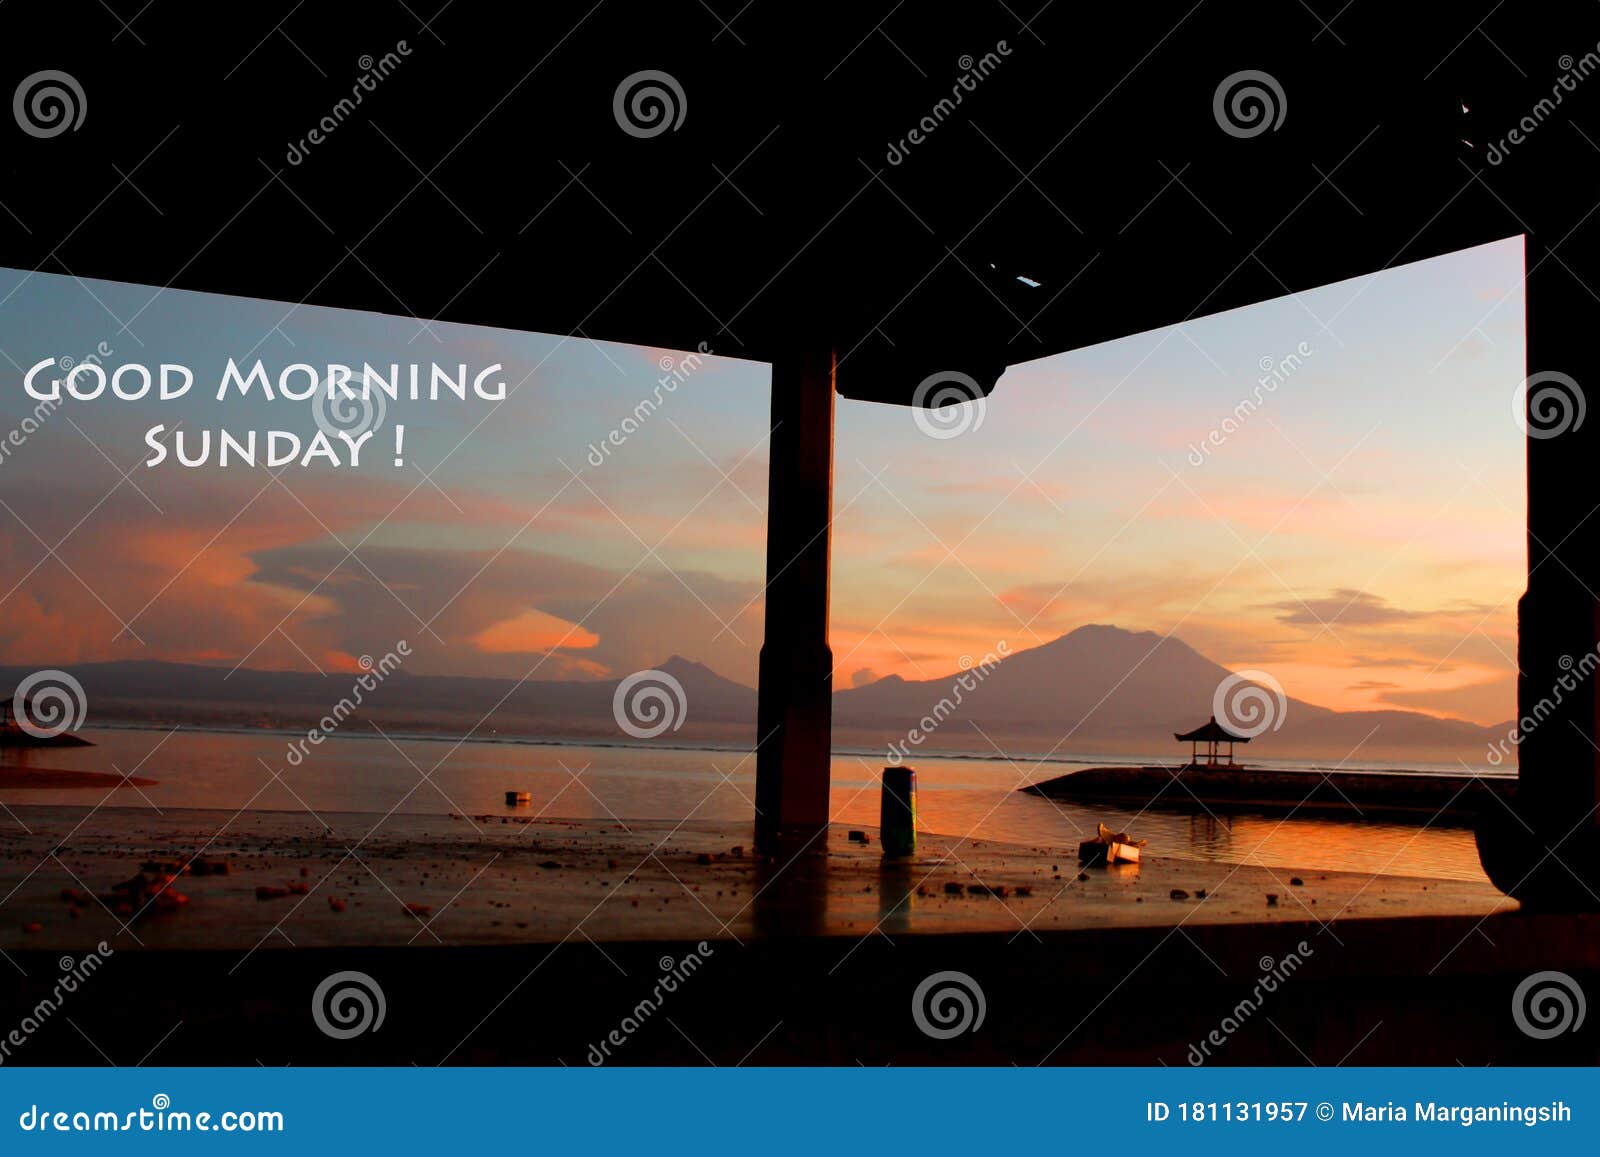 Sunday Morning Greetings Good Morning Sunday With Colorful Sky Over The Sea Mountain At Sunrise In Movie Perspective View Stock Image Image Of Composition Greetings